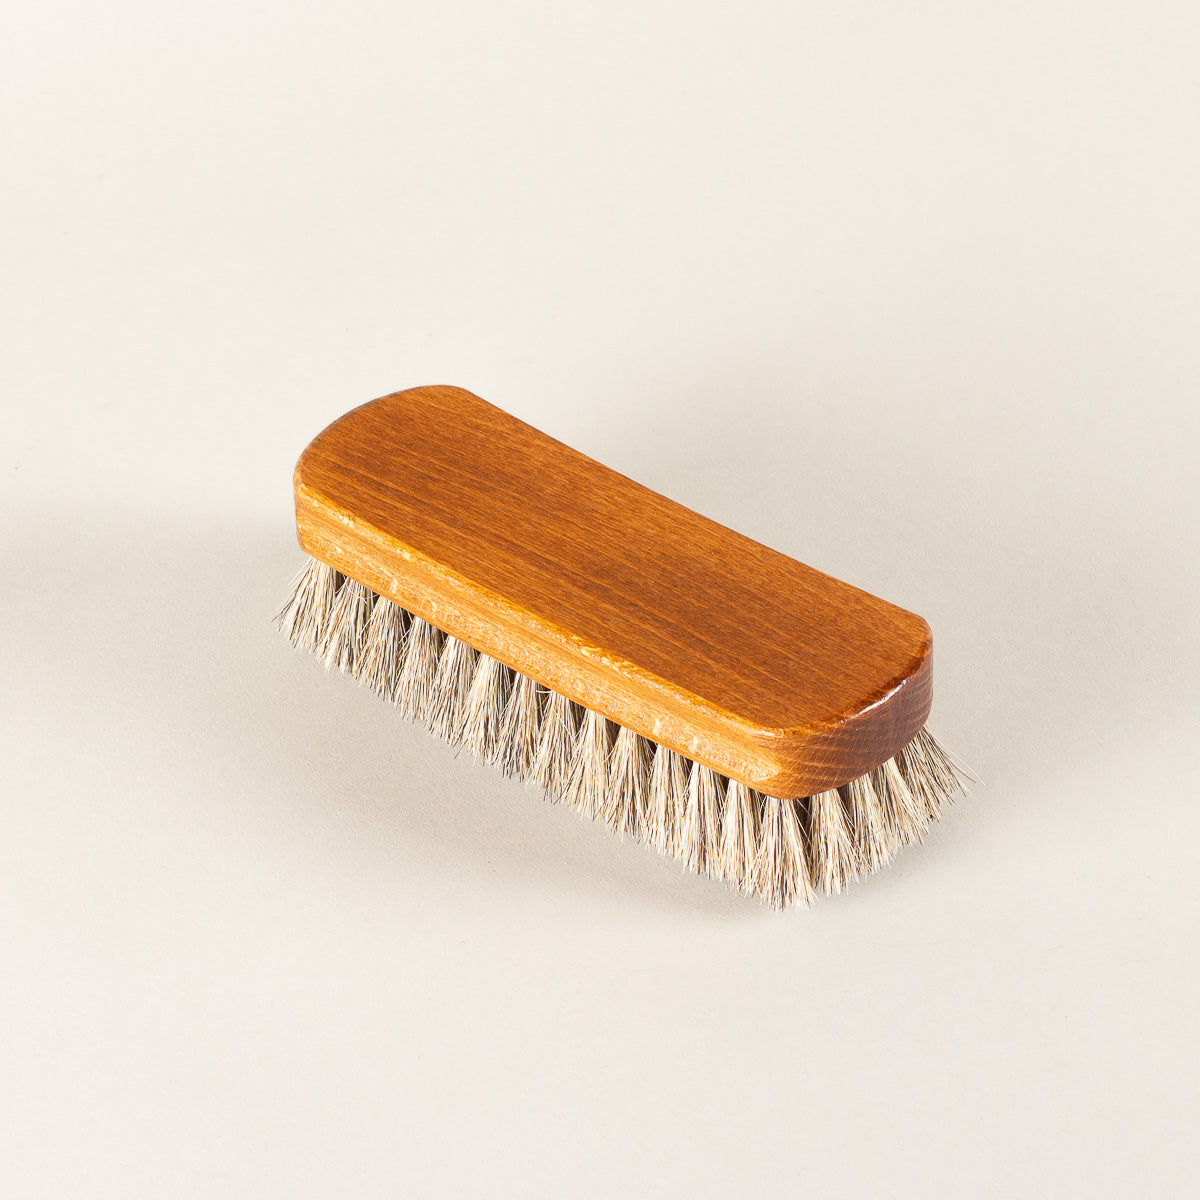 The Shoe Care Shop Set of 2 polishing brushes - 100% horsehair